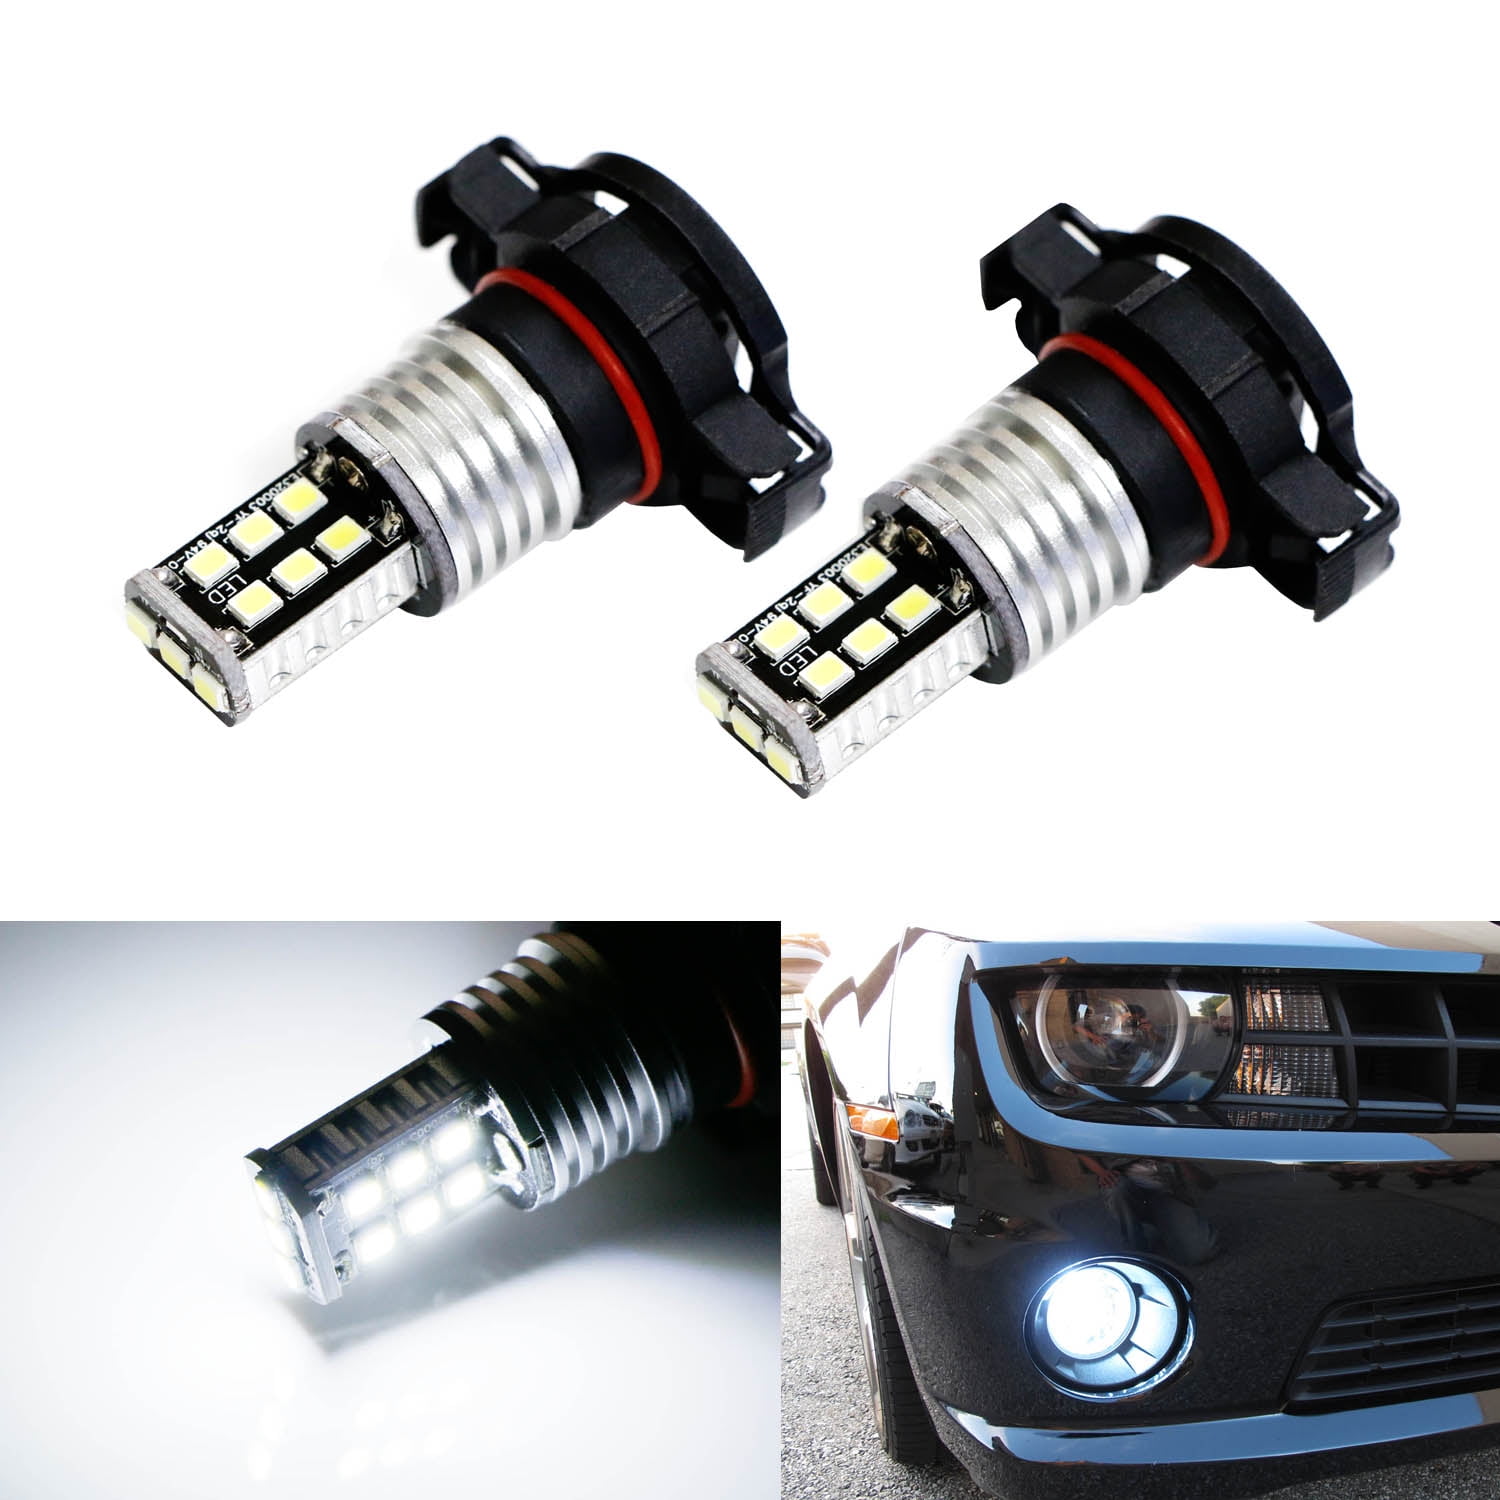 2x 6000K HID xenon white 68-SMD LED P13W bulbs driving fog lights lamps DRL